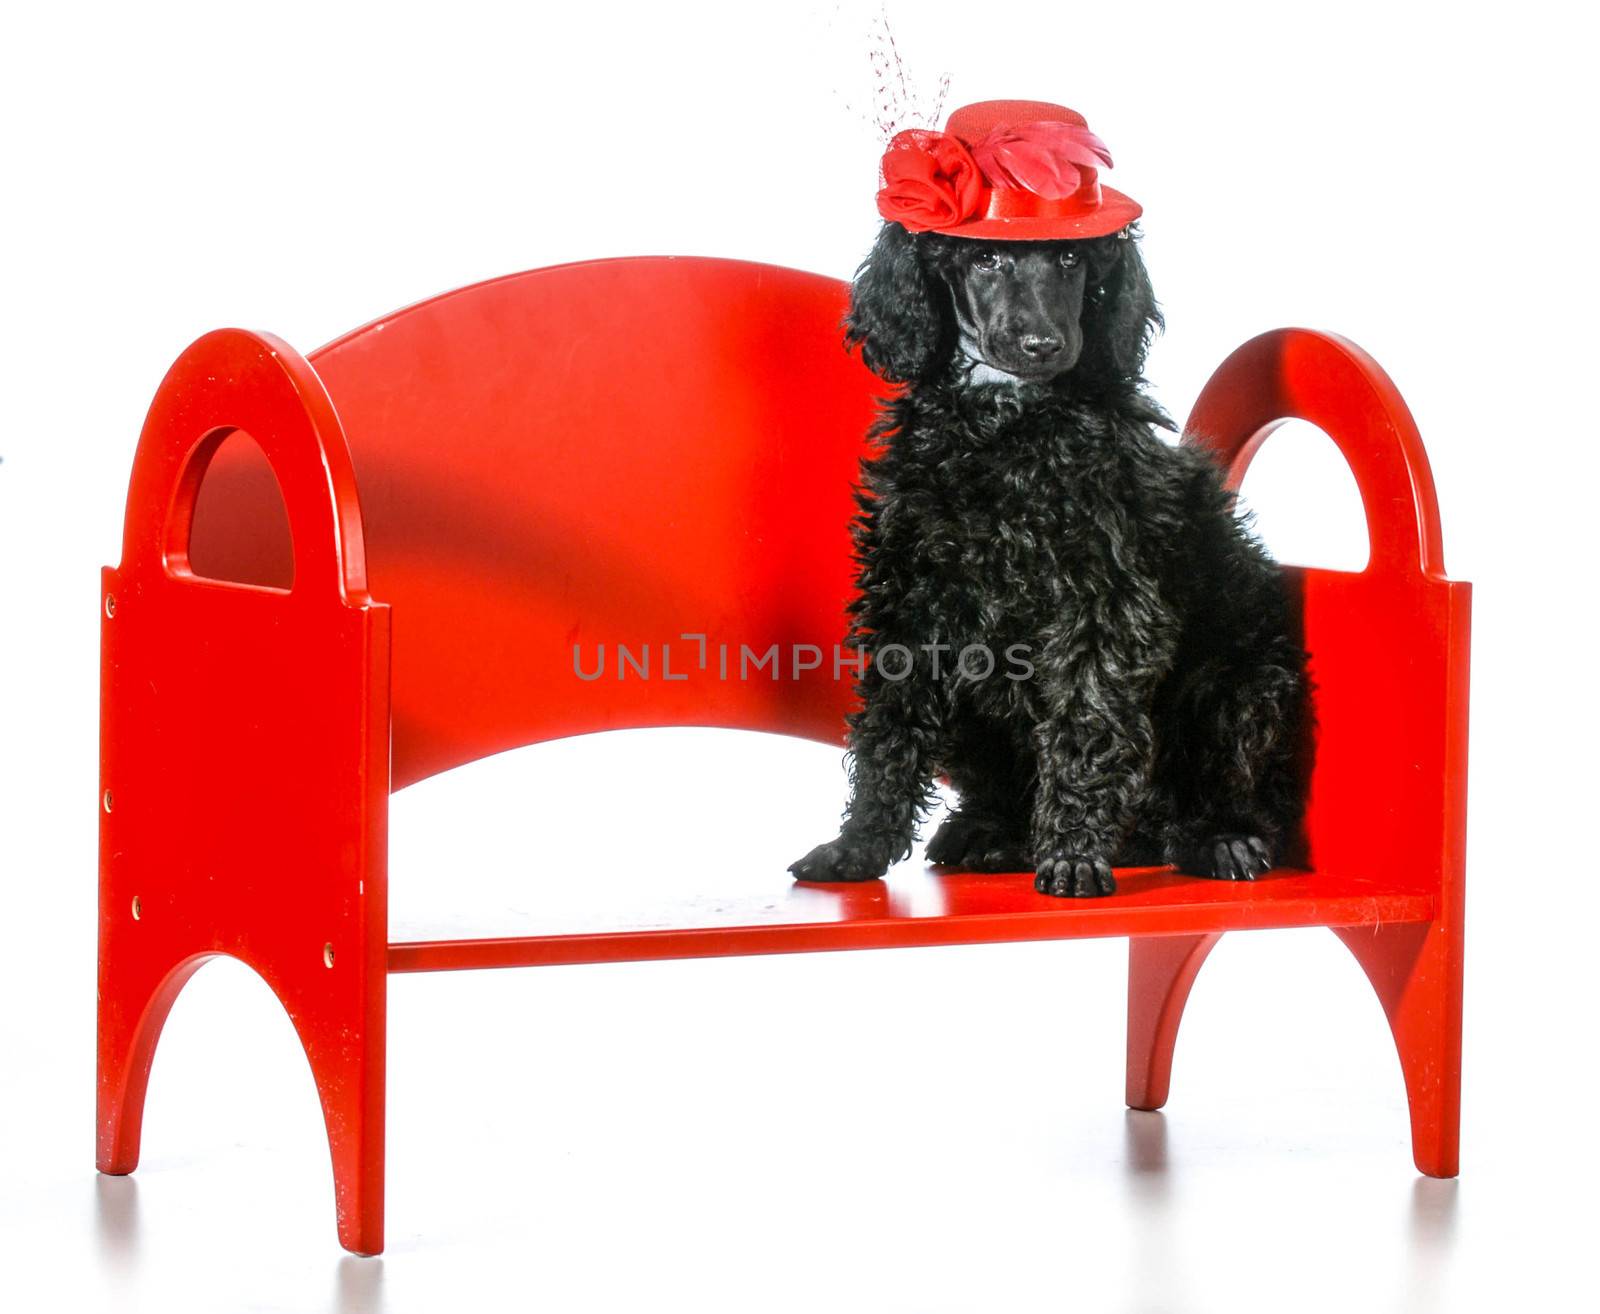 female dog - standard poodle wearing a red had sitting on a red bench isolated on white background